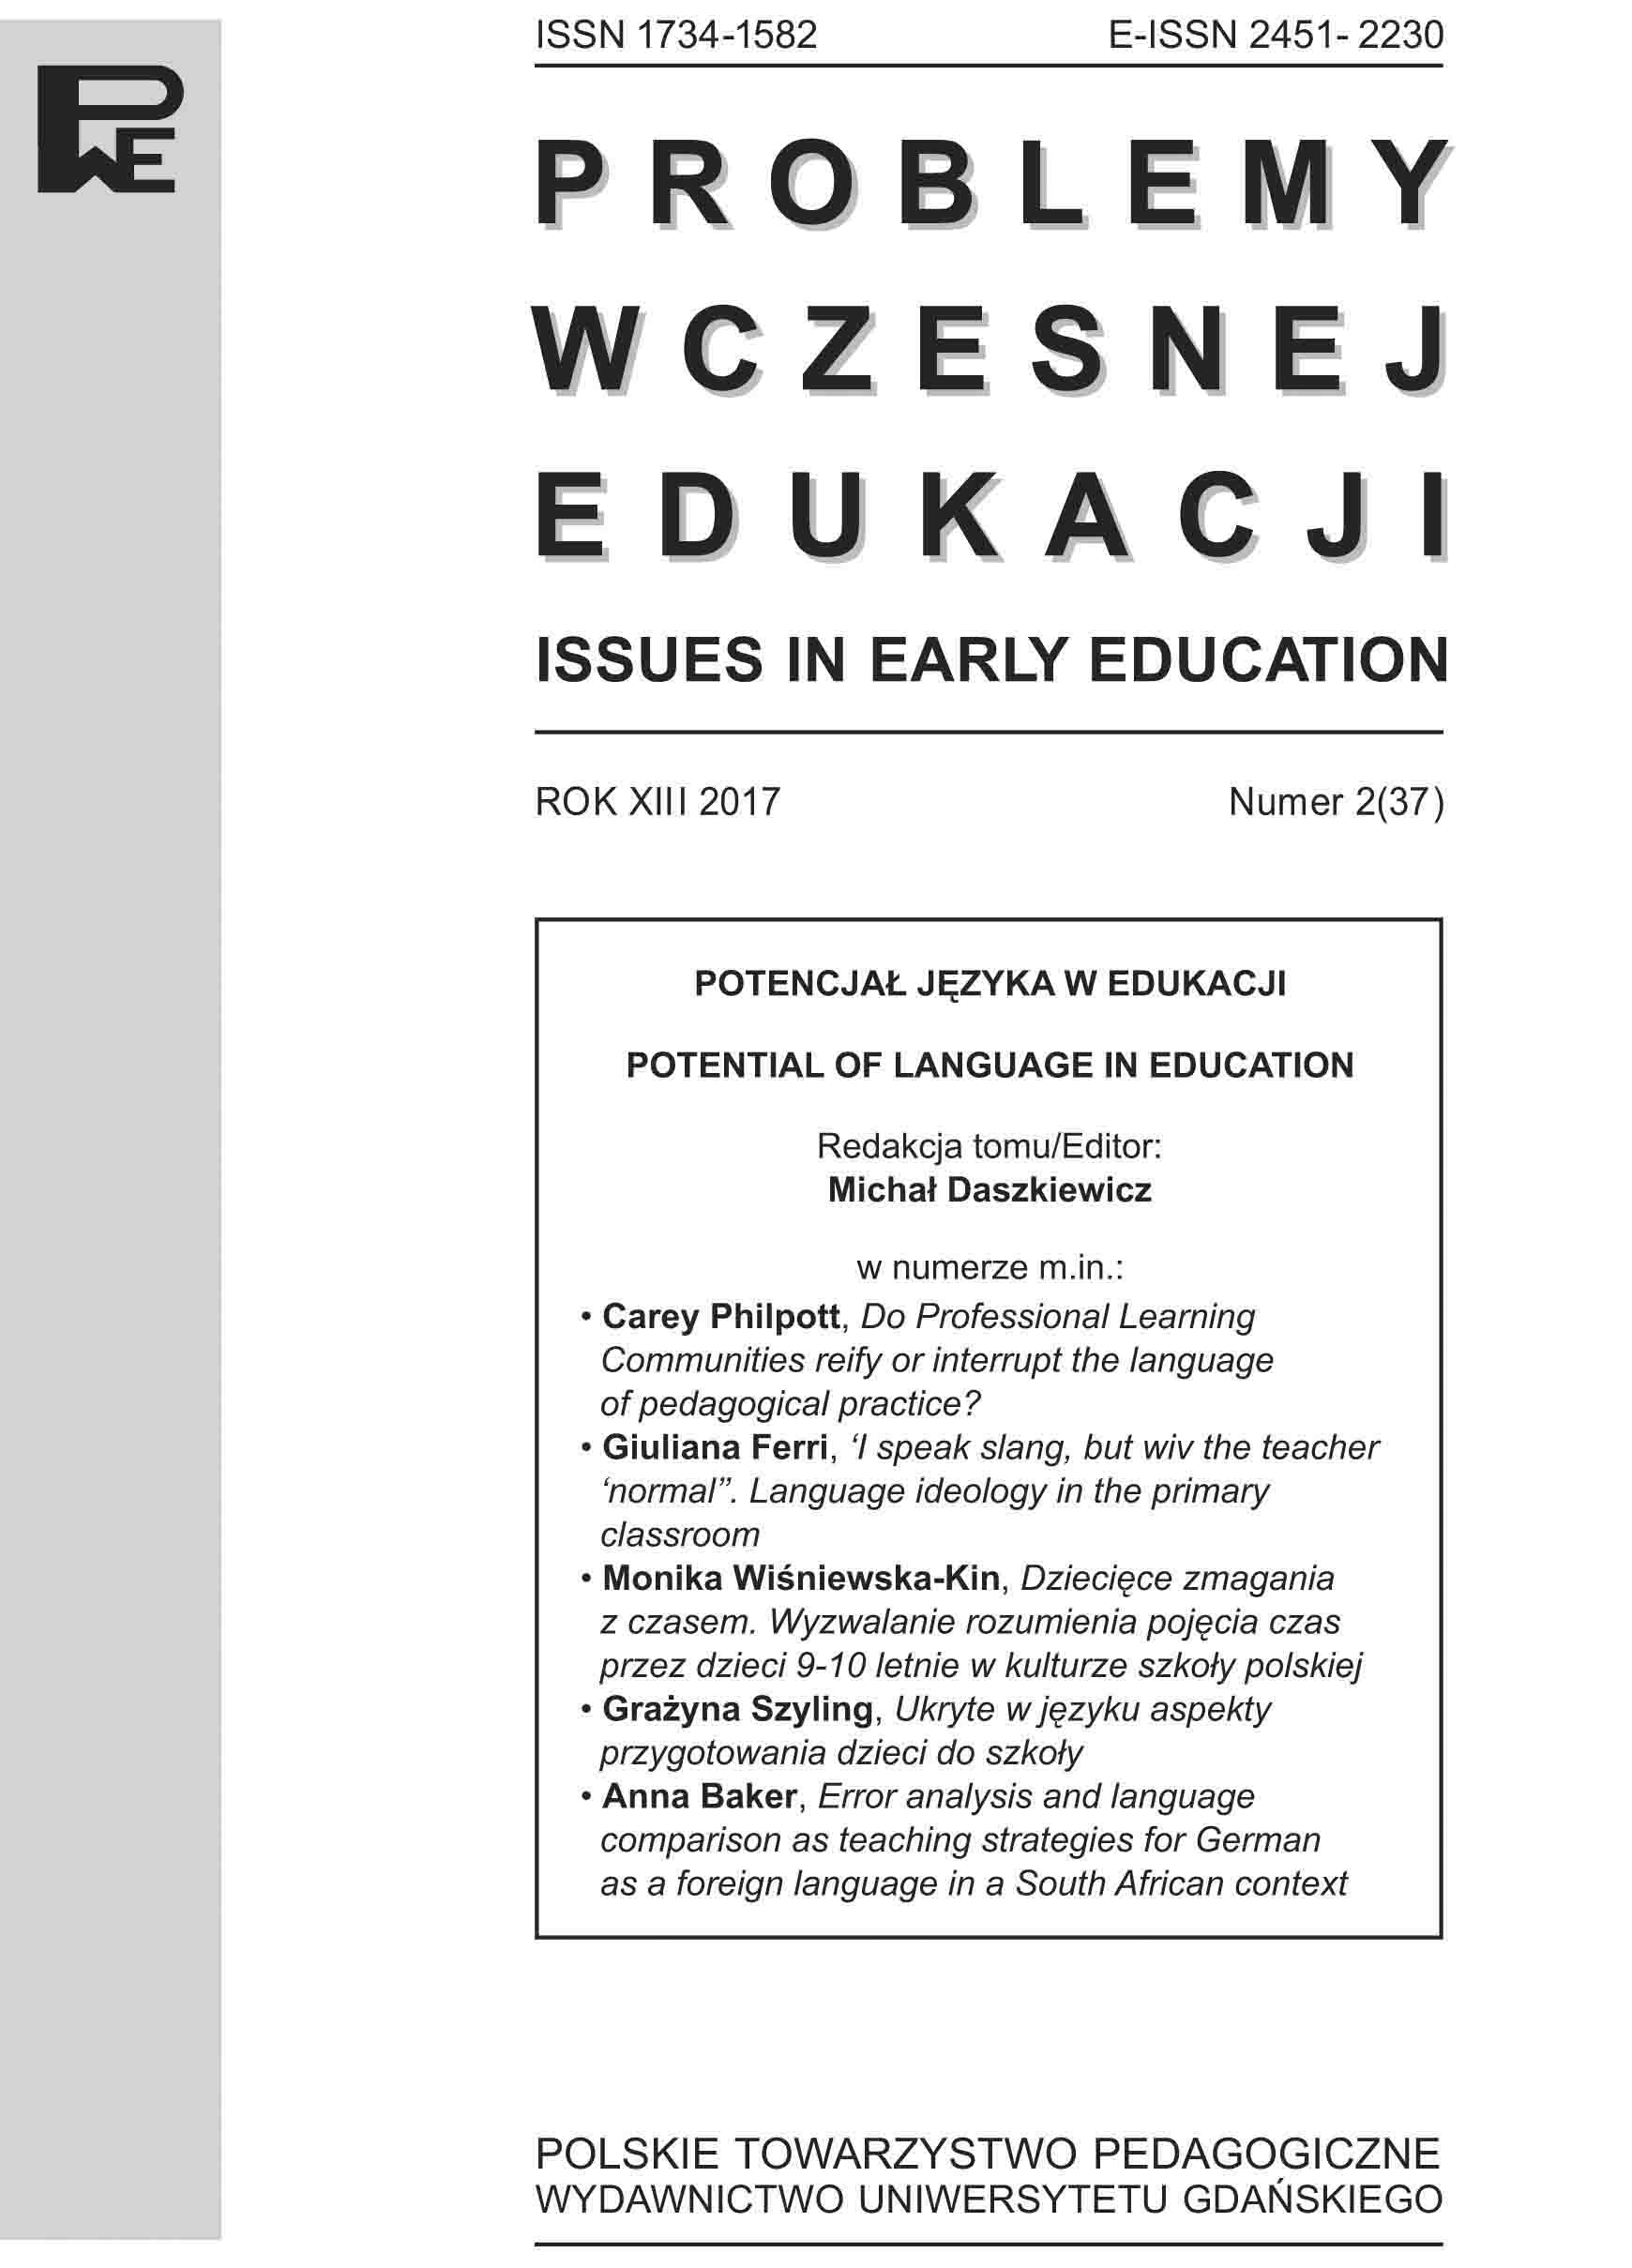 Report on the initial stage of activity
of academics cooperating as the Educational Role of Language Network Cover Image